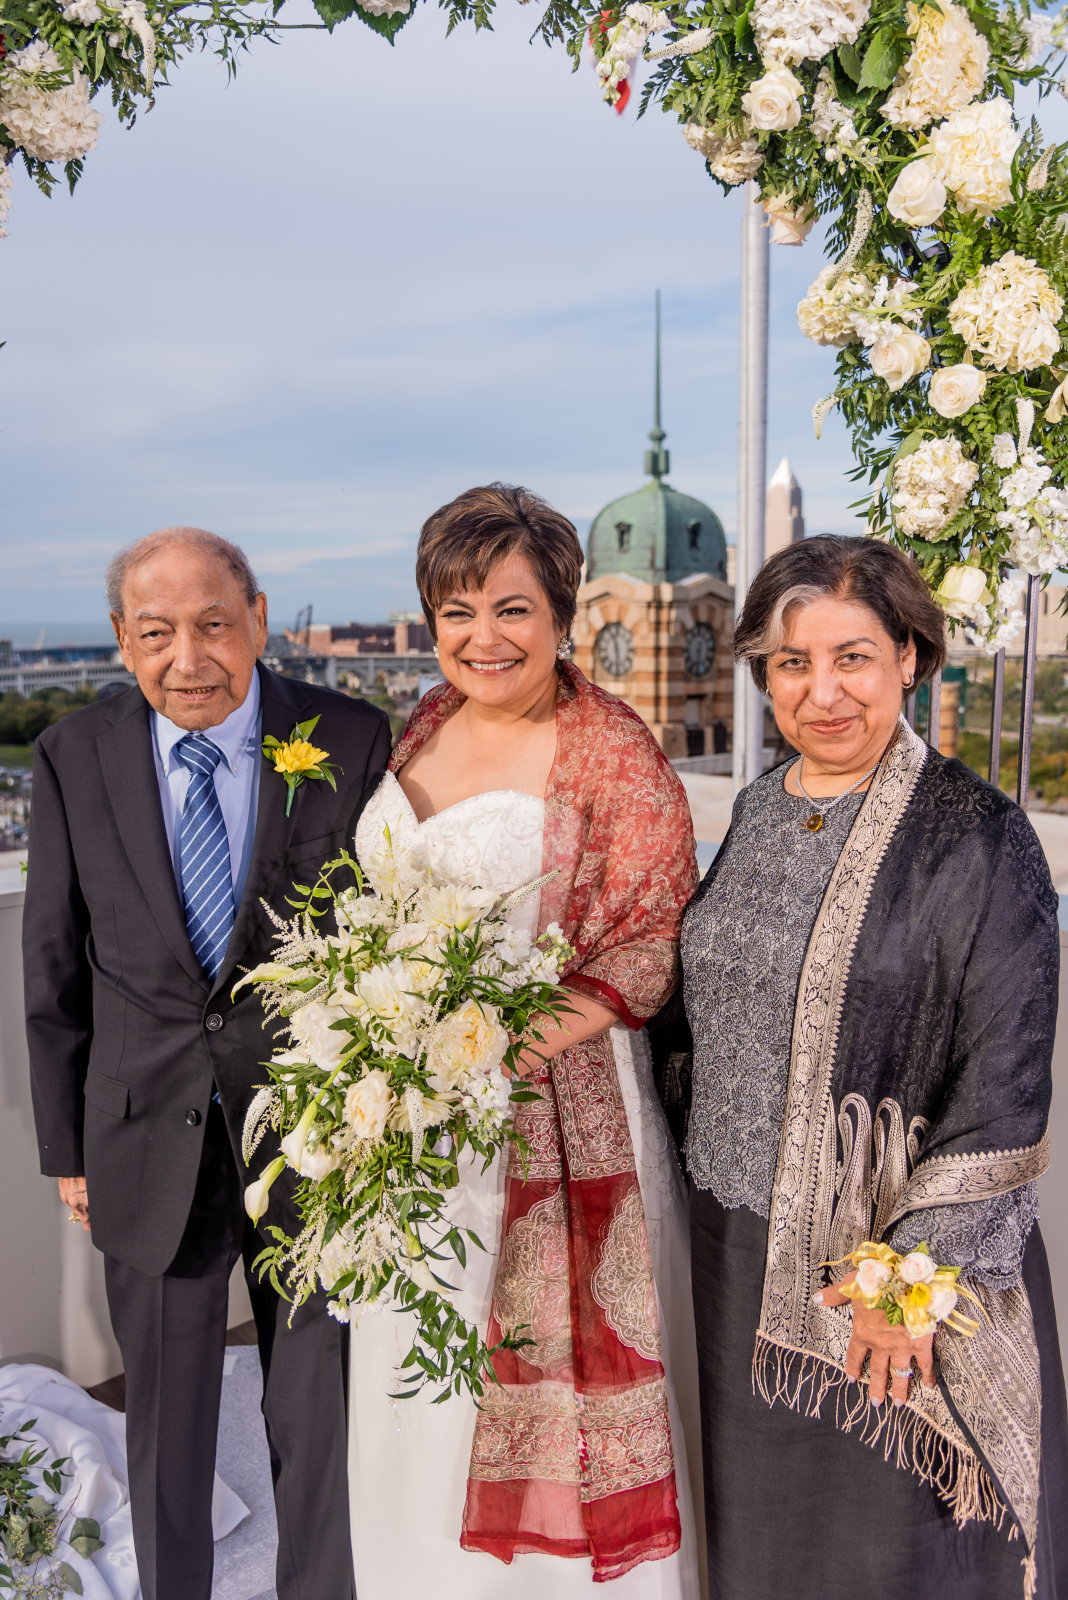 Bride with mom and dad, parents of the bride, family portrait, smile, cute wedding photo, older bride, older couple, romantic outdoor urban wedding ceremony at Penthouse Events, Ohio City, Cleveland Flats, Lake Erie, West Side Market